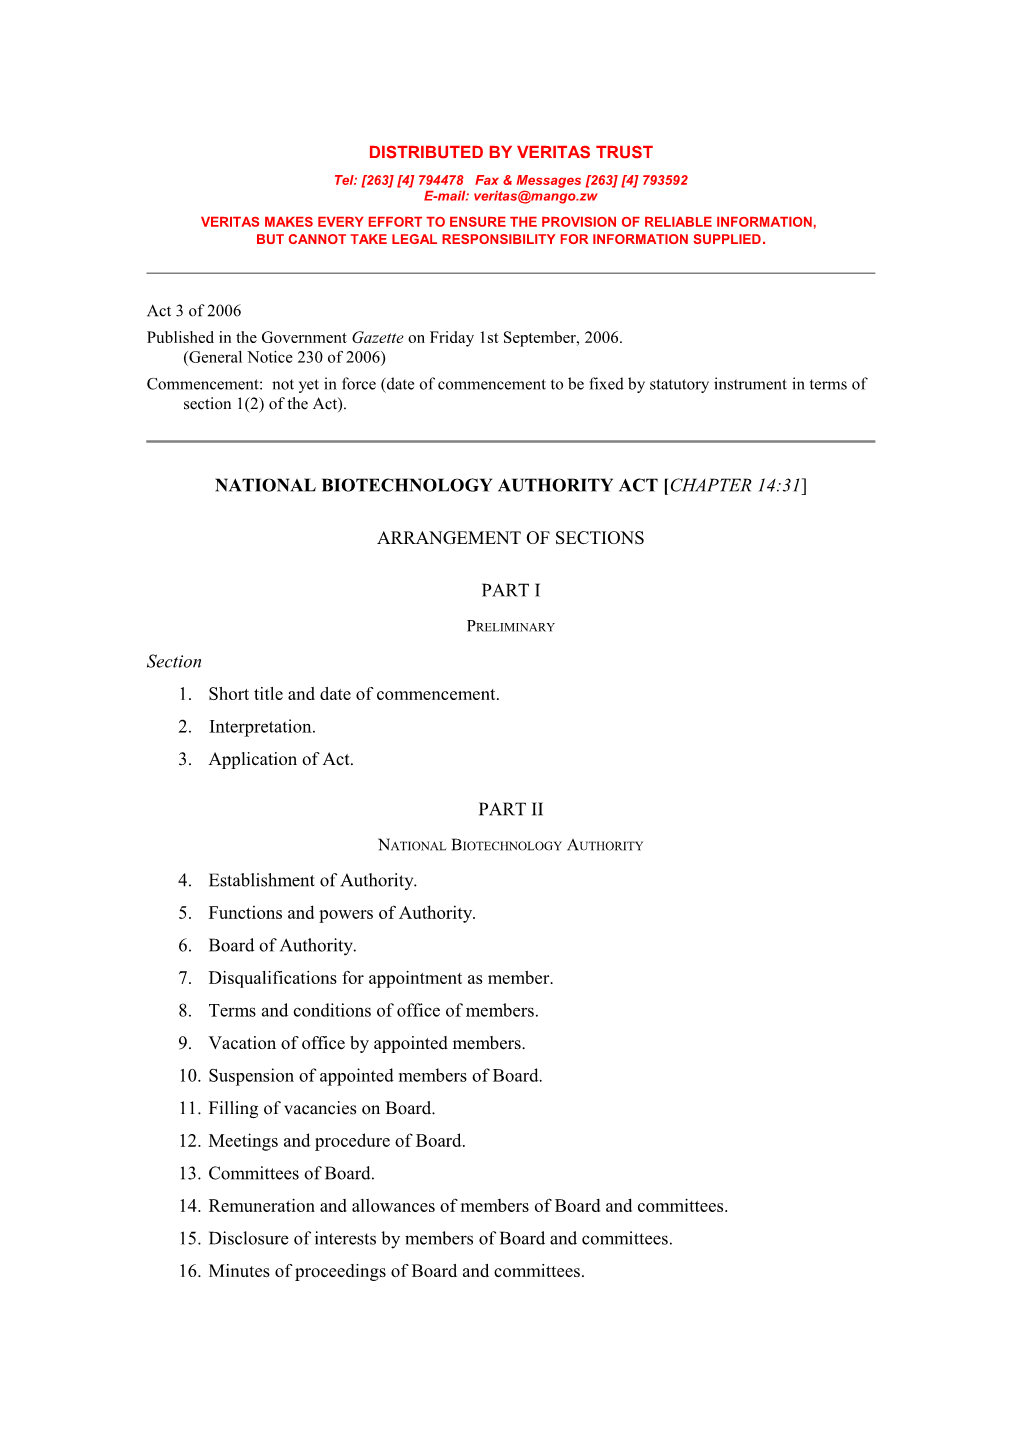 National Biotechnology Authorityact Chapter 14:31 - Act No. 3 of 2006Ority Bill, 2004